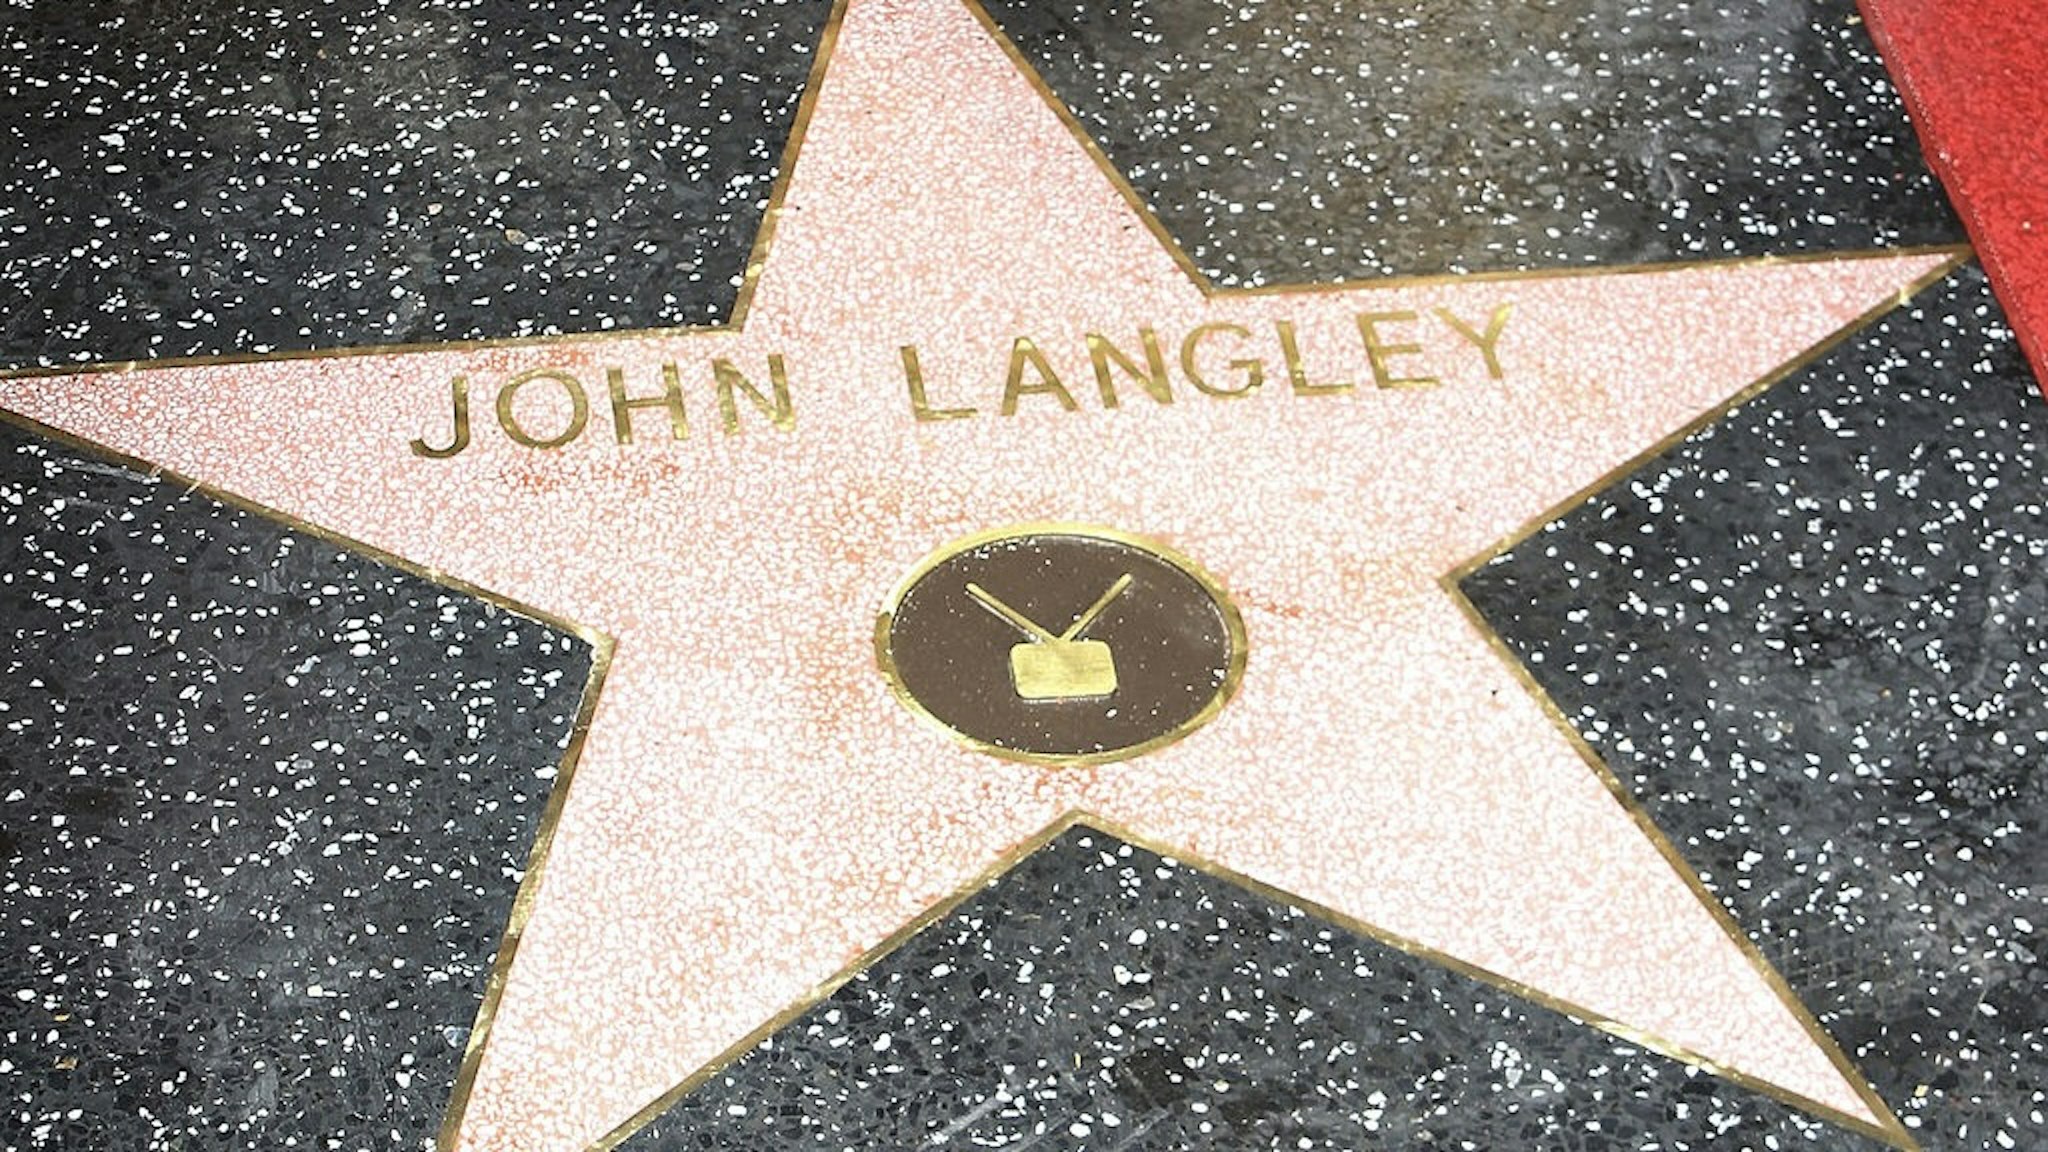 "COPS" Creator John Langley Receives Star On The Hollywood Walk Of Fame Atmosphere at the ceremony honoring "COPS" creator John Langley with a Star on The Hollywood Walk of Fame held on February 11, 2011 in Hollywood, California. (Photo by Michael Tran/FilmMagic) Michael Tran / Contributor via Getty Images